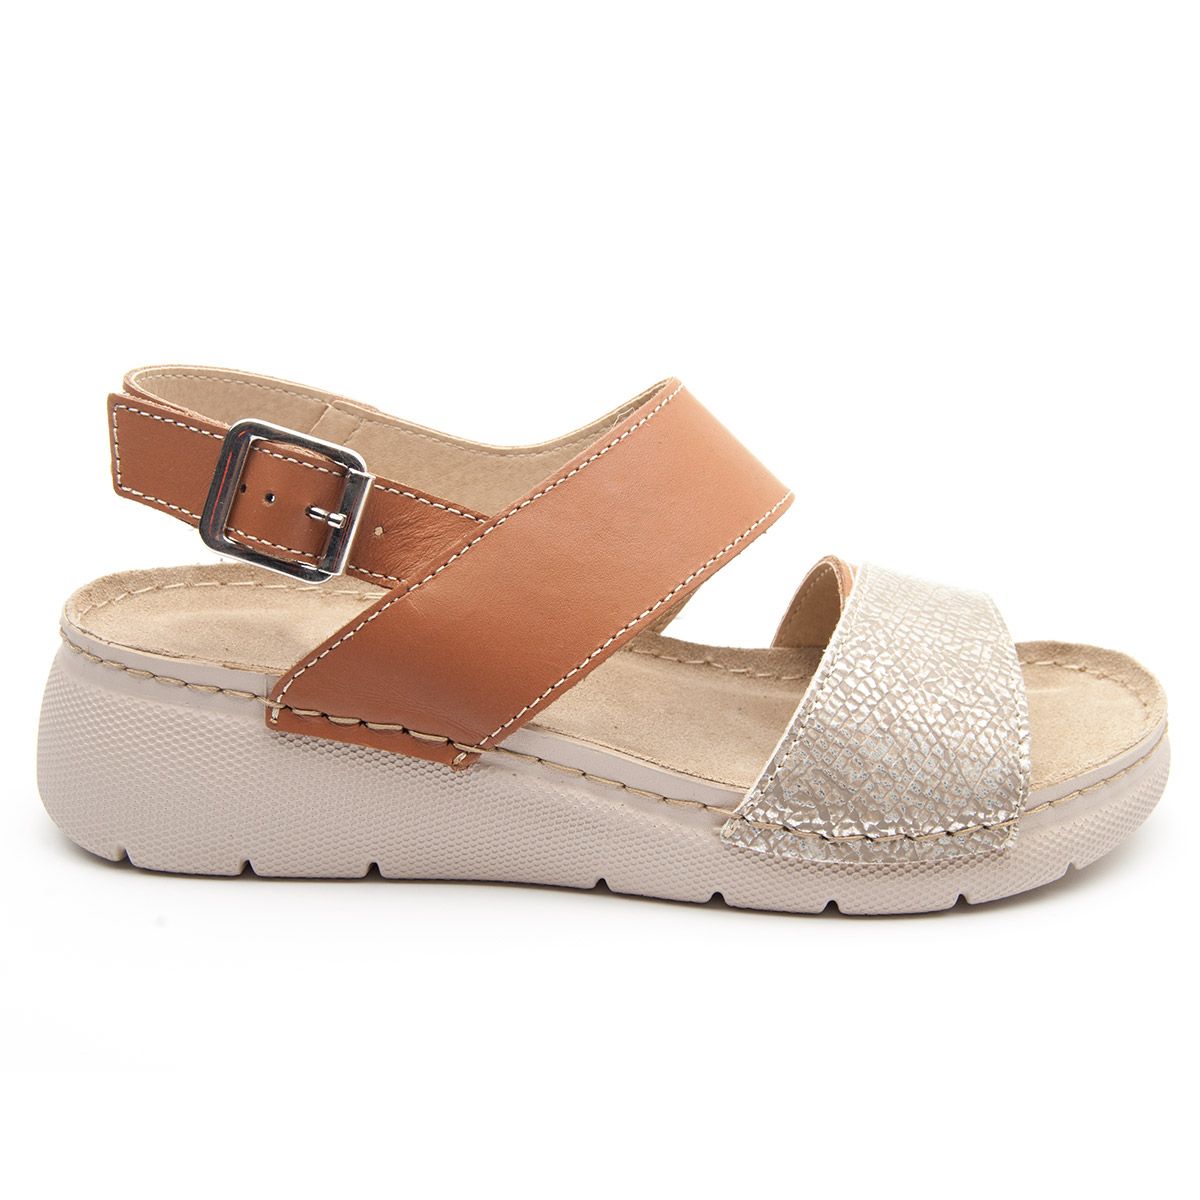 This sandal is on the maximum category of comfort. This is because its plant is made of leather, is padded, has wide horm and a great fastening since it has front strips and another in the heel with buckle closure. Its polyuteran sole is comfortable and non-slip. It consists of a small wedge of 4 cm comfortable and suitable for any occasion. It is doubly sewn by giving greater resistance and consistency to footwear. Easy to clean thanks to its resistant and soft material. 100% manufactured in Spain.